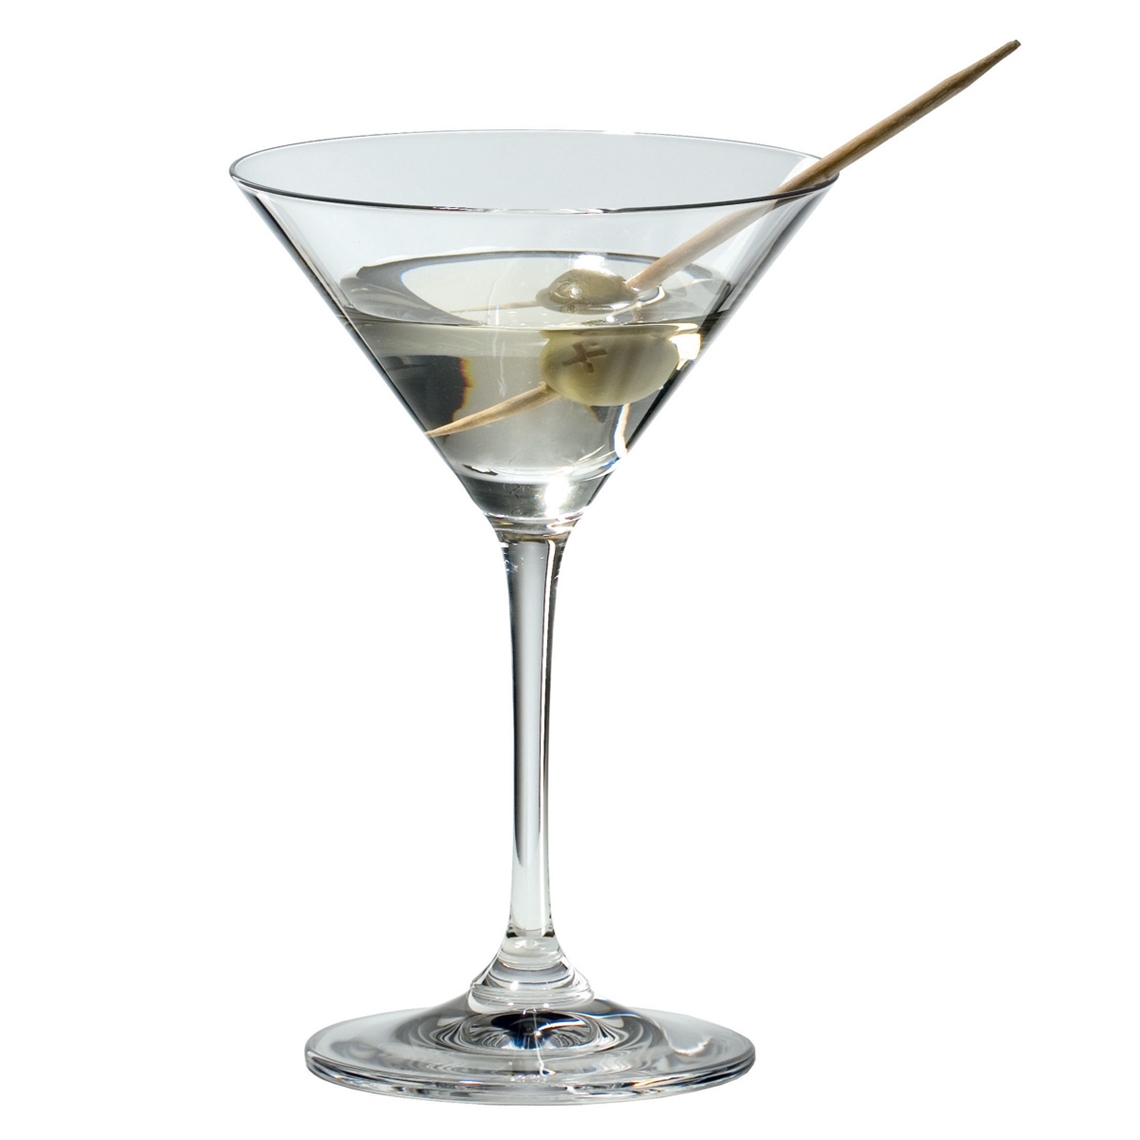 View more which riedel wine glass to choose from our Martini Glasses range